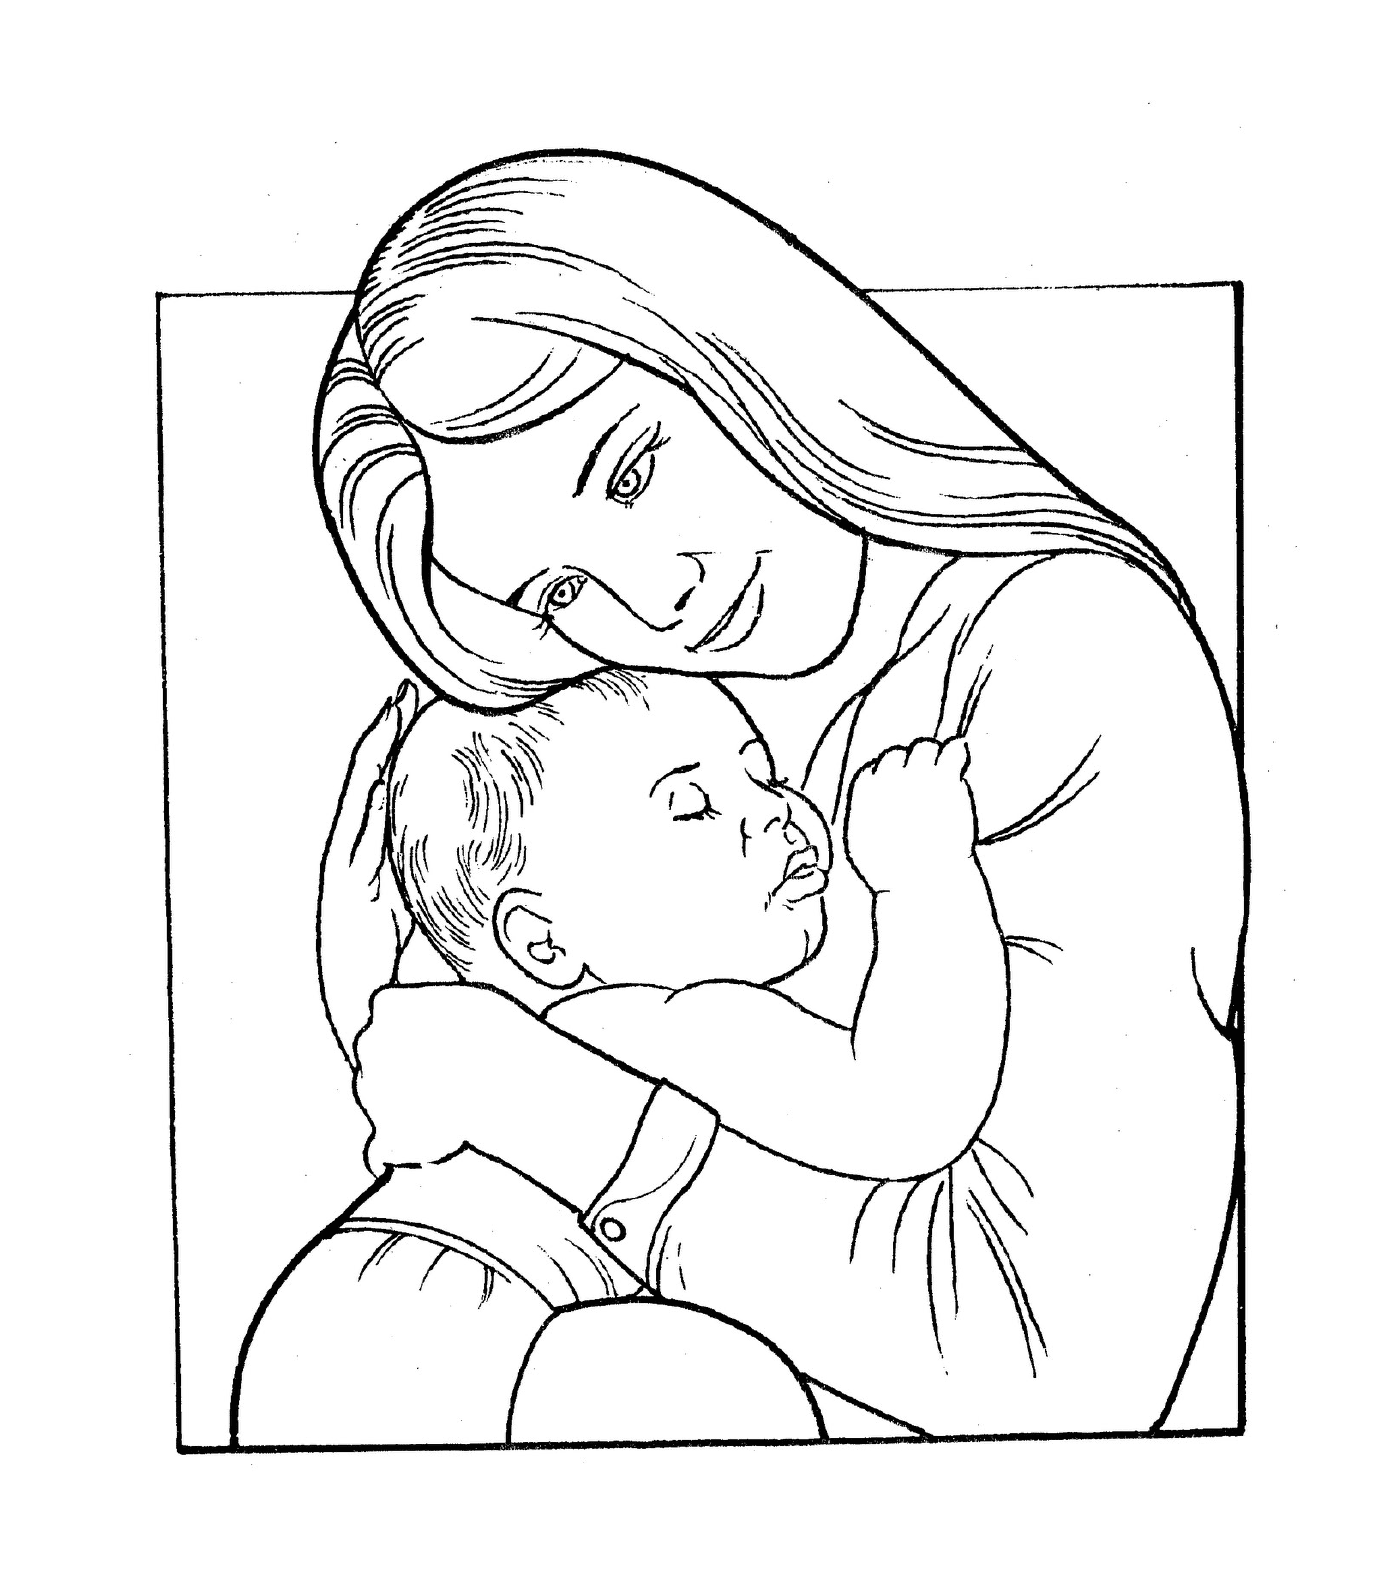  A woman holding a baby 